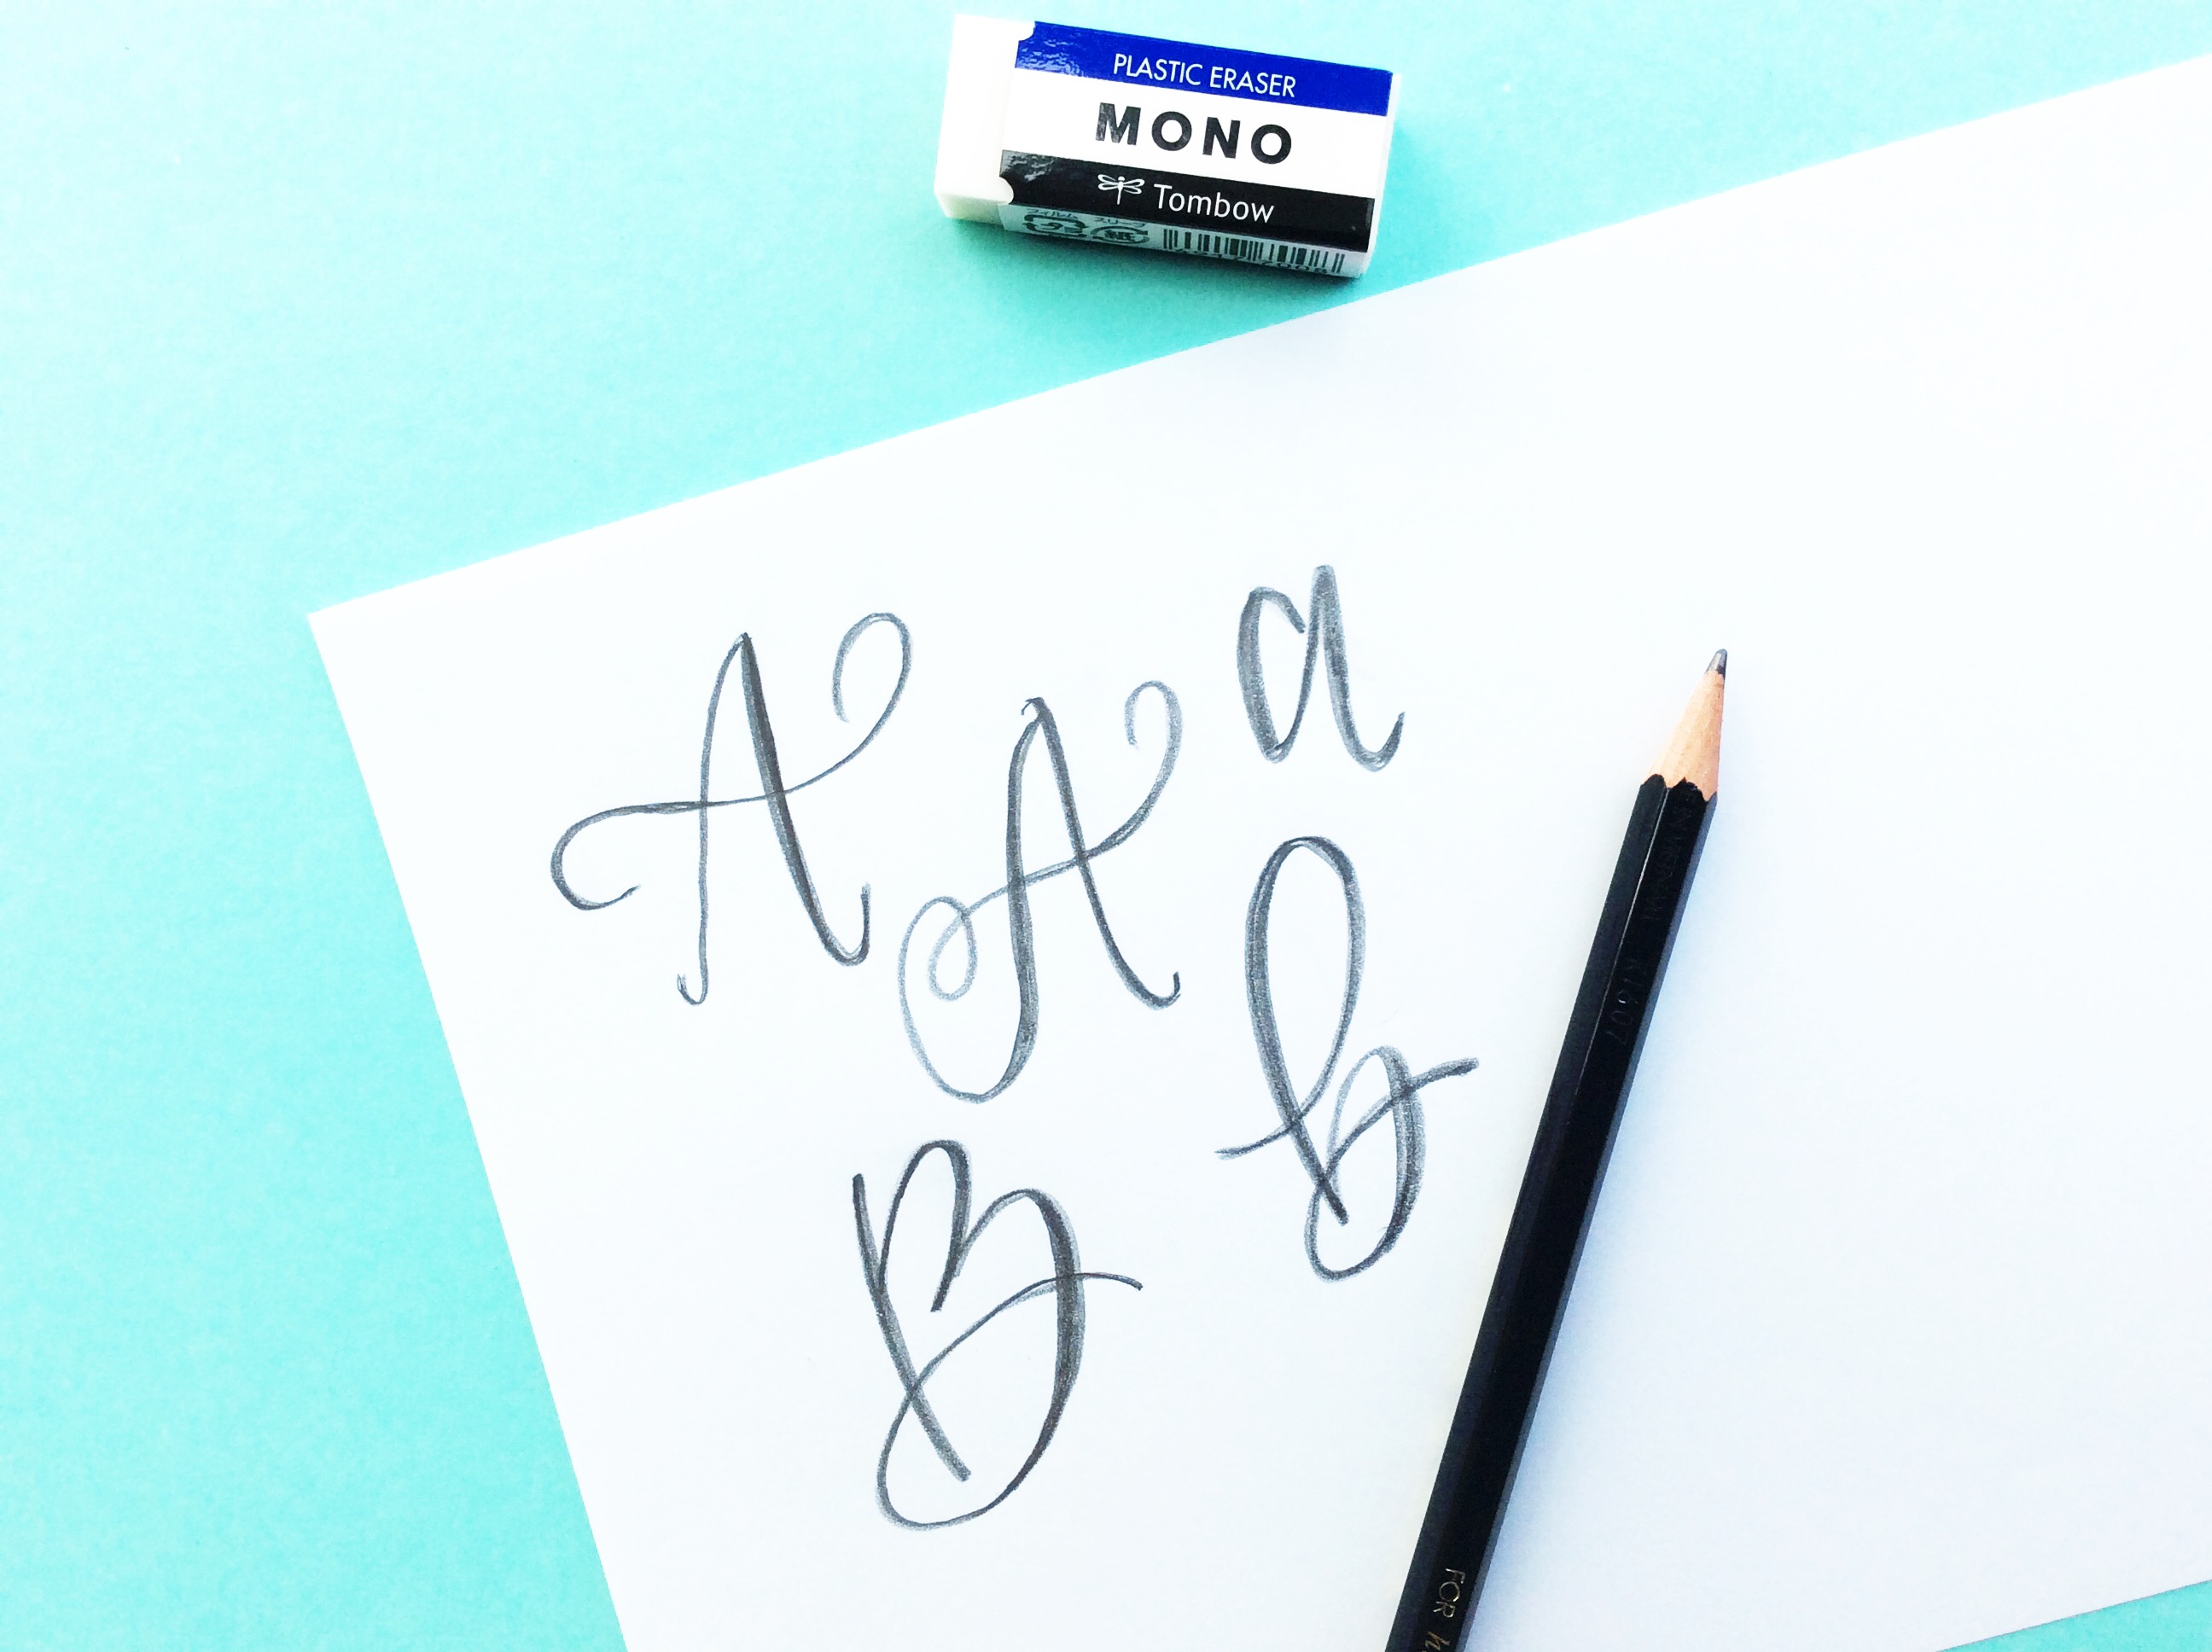 Tombow Dual Brush Pen & Other Pens For Hand Lettering Beginners